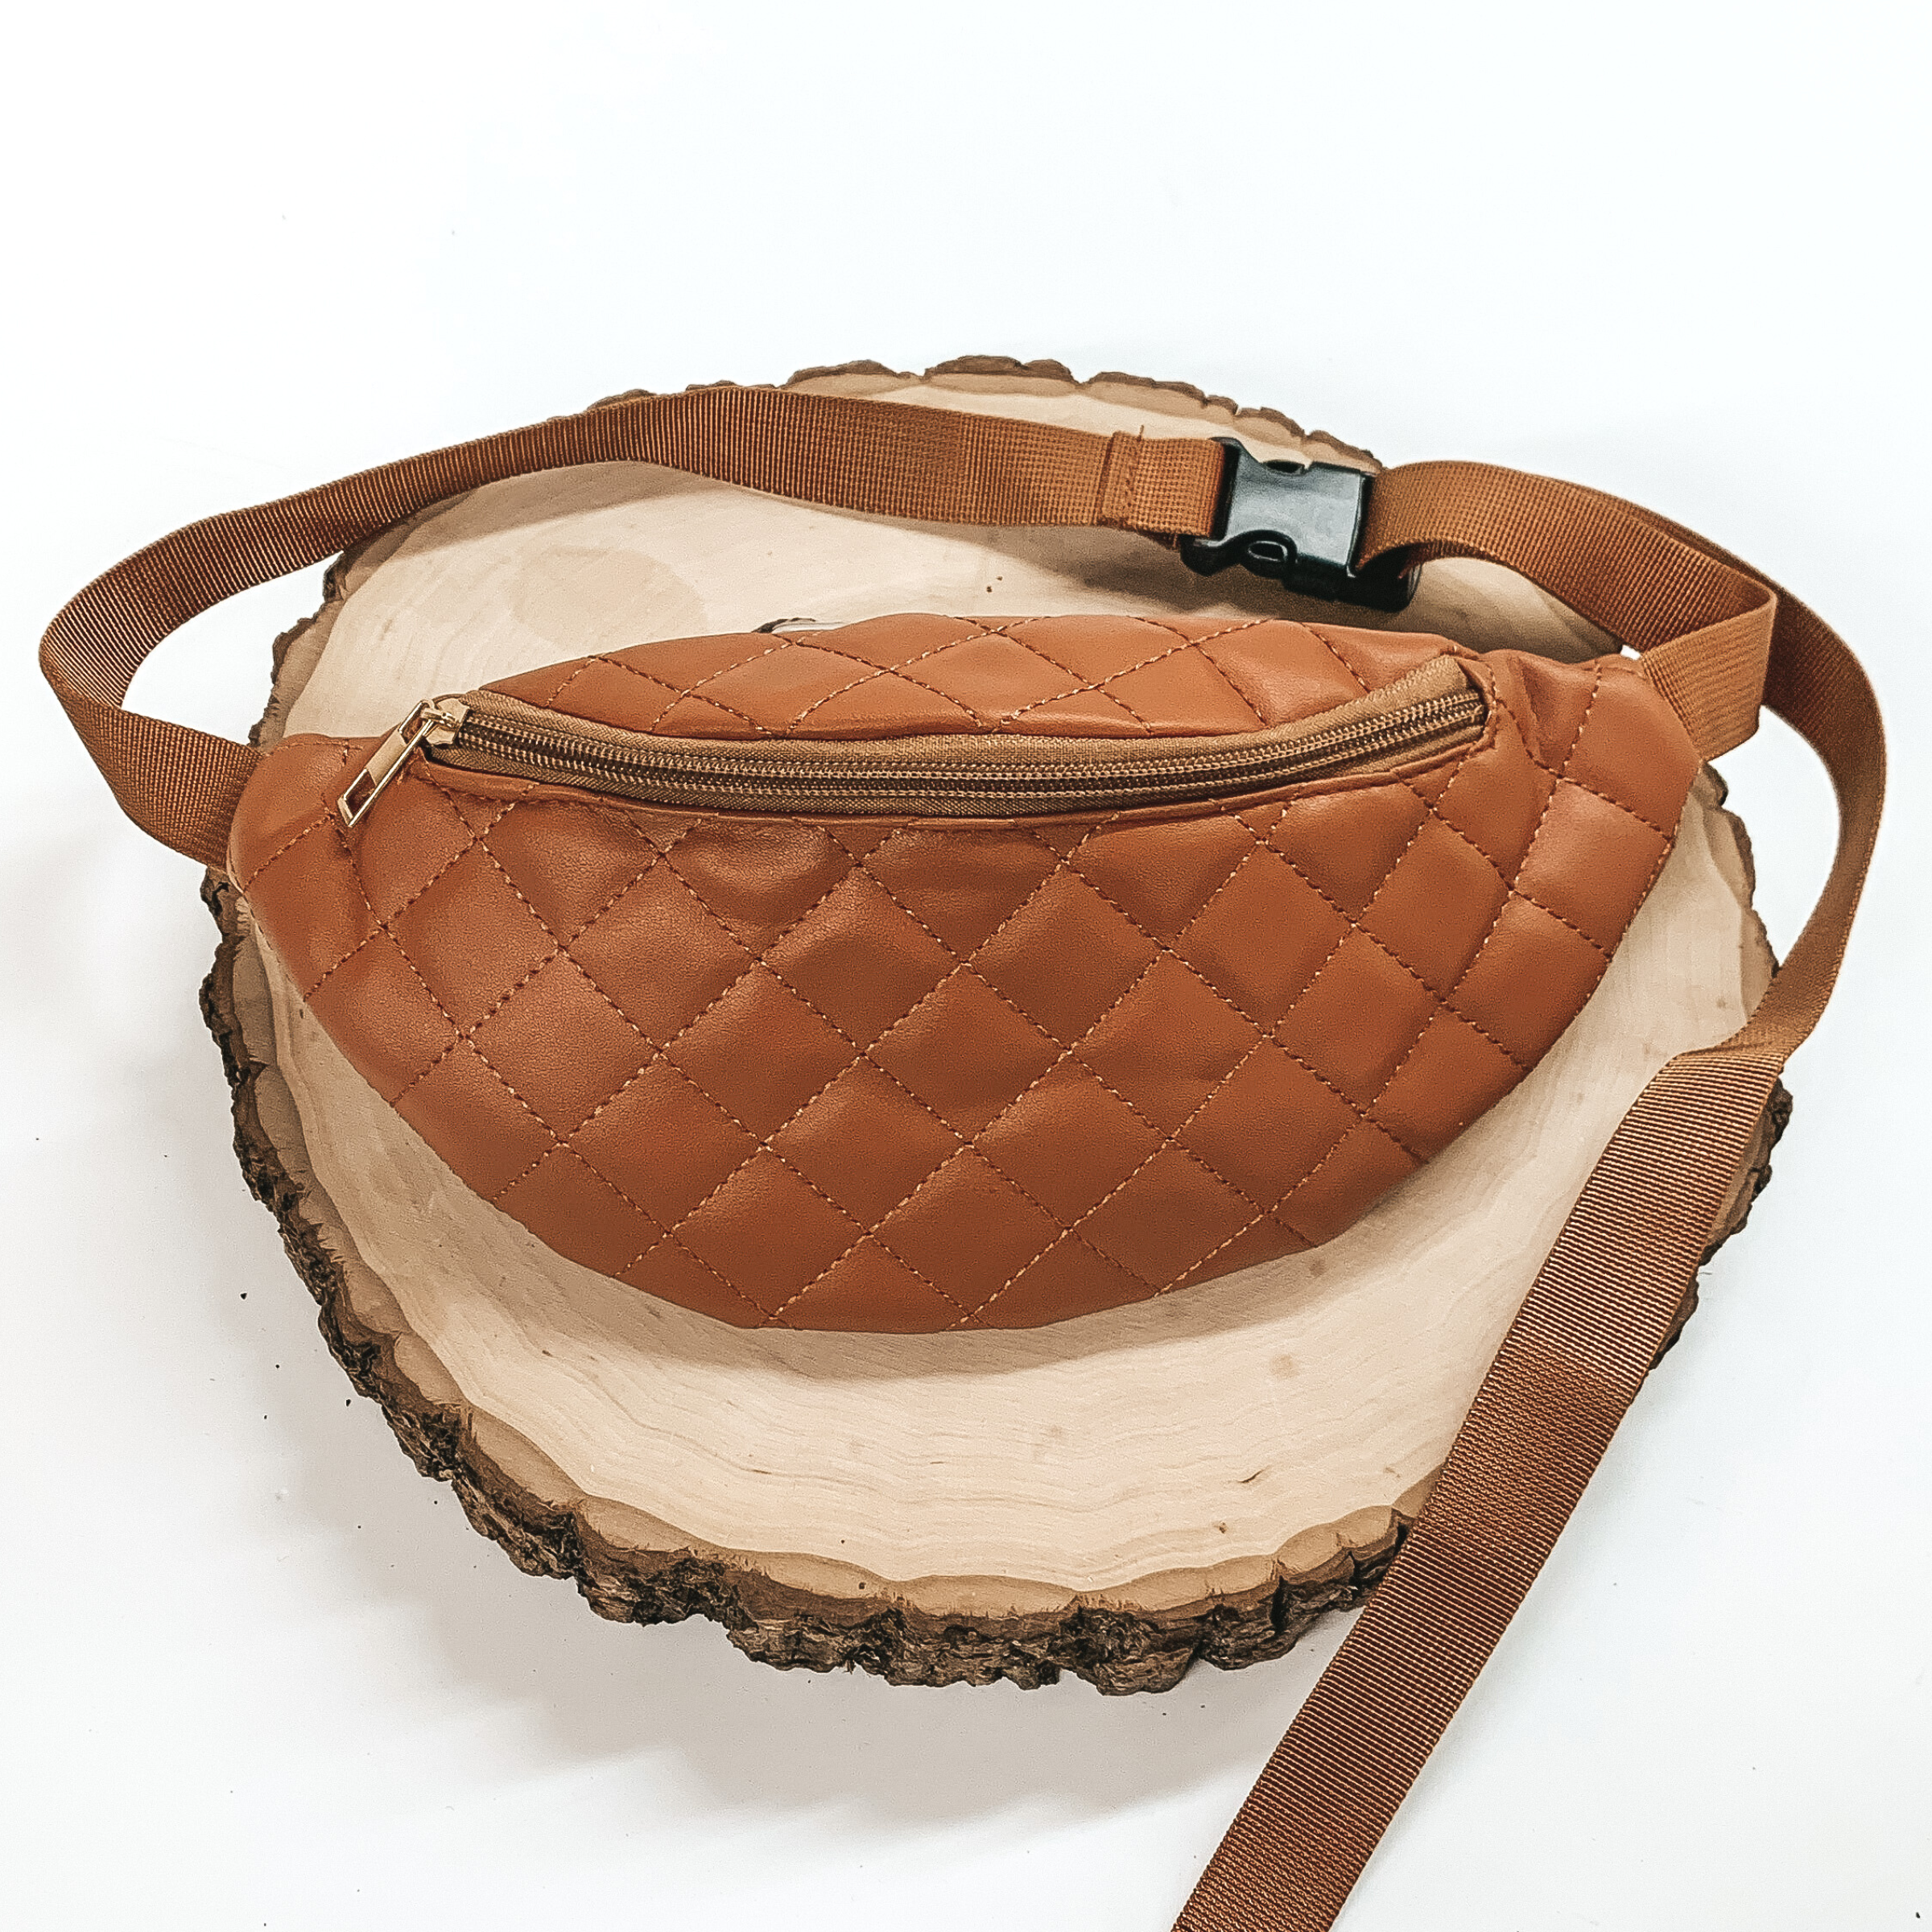 Cognac, quilted fanny pack with a zipper across the front. This fanny pack also includes brown straps and black clips. This fanny pack is pictured on a piece of wood on a white background. 